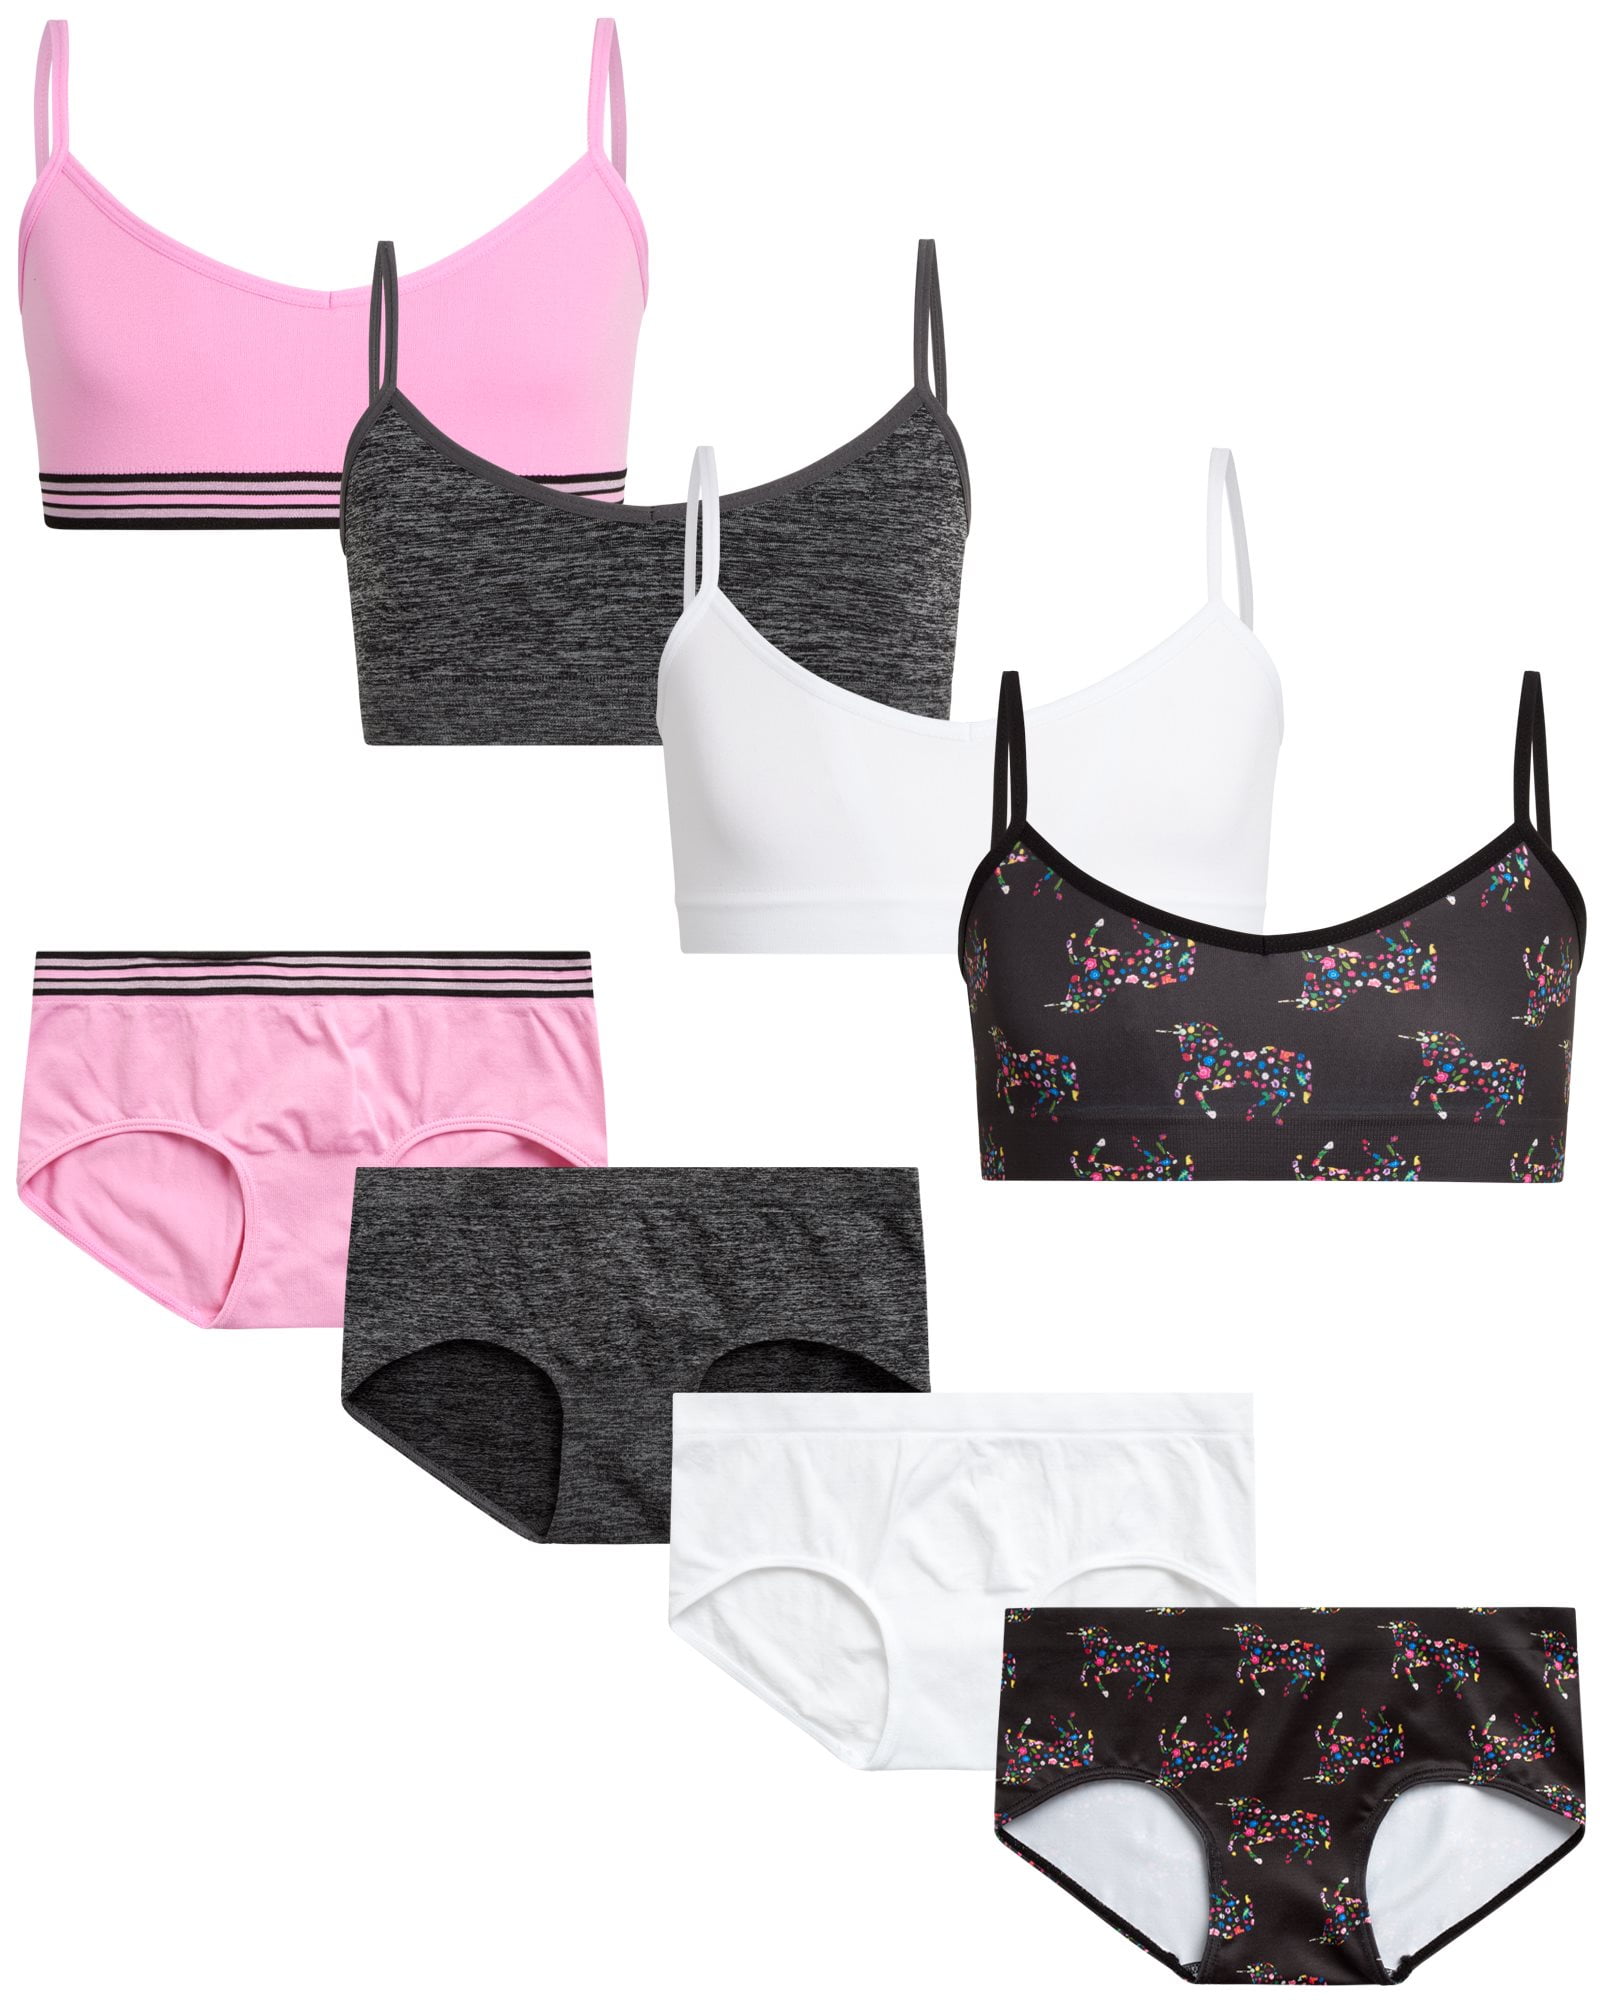  Sweet & Sassy Girls' Training Bra Set - 8 Piece Seamless Cami  Bralette and Underwear, Size Small, Charcoal/Pink/Brown/Cream Solids:  Clothing, Shoes & Jewelry